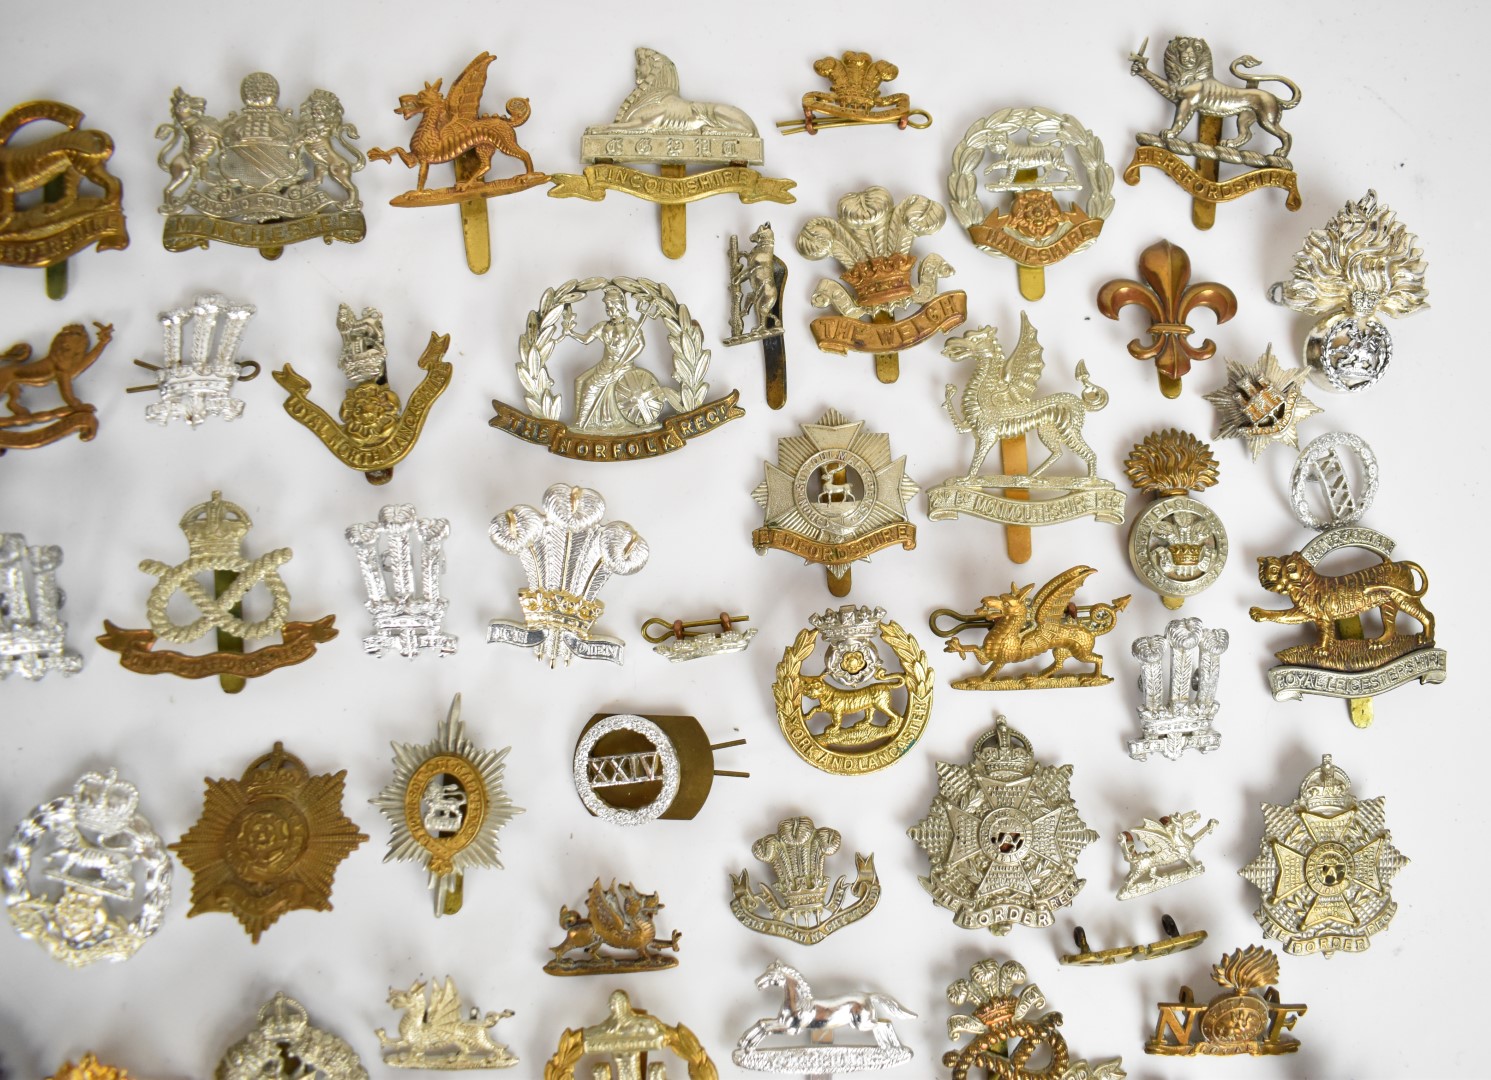 Large collection of approximately 100 British Army cap badges including Middlesex Regiment, - Image 4 of 5